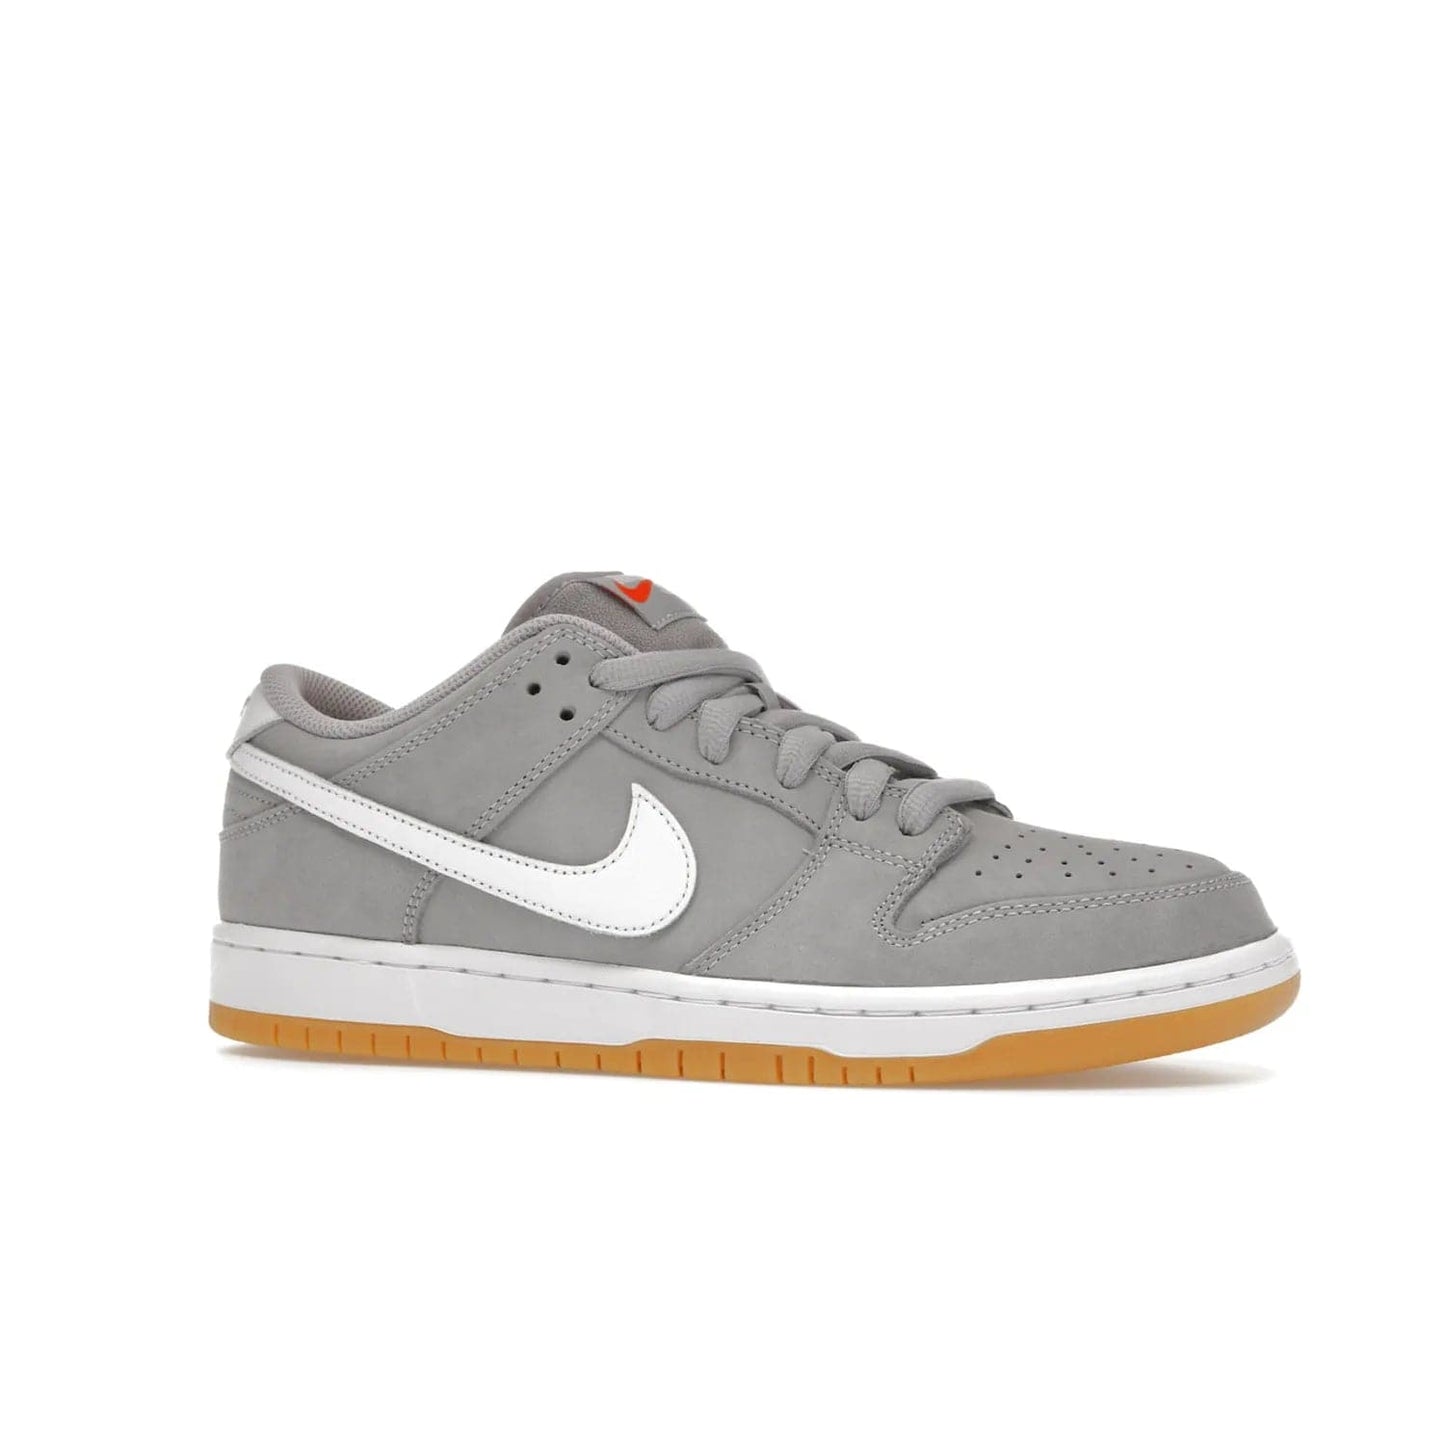 Nike SB Dunk Low Pro ISO Orange Label Wolf Grey Gum - Image 3 - Only at www.BallersClubKickz.com - Introducing Nike's SB Dunk Low Pro ISO Orange Label Wolf Grey Gum - a stylish shoe with a premium Wolf Grey upper, white leather Nike Swoosh, and an eye-catching gum outsole. With special Nike branding and packaging, this shoe adds a unique fashion statement. Out Feb. 24, 2023.